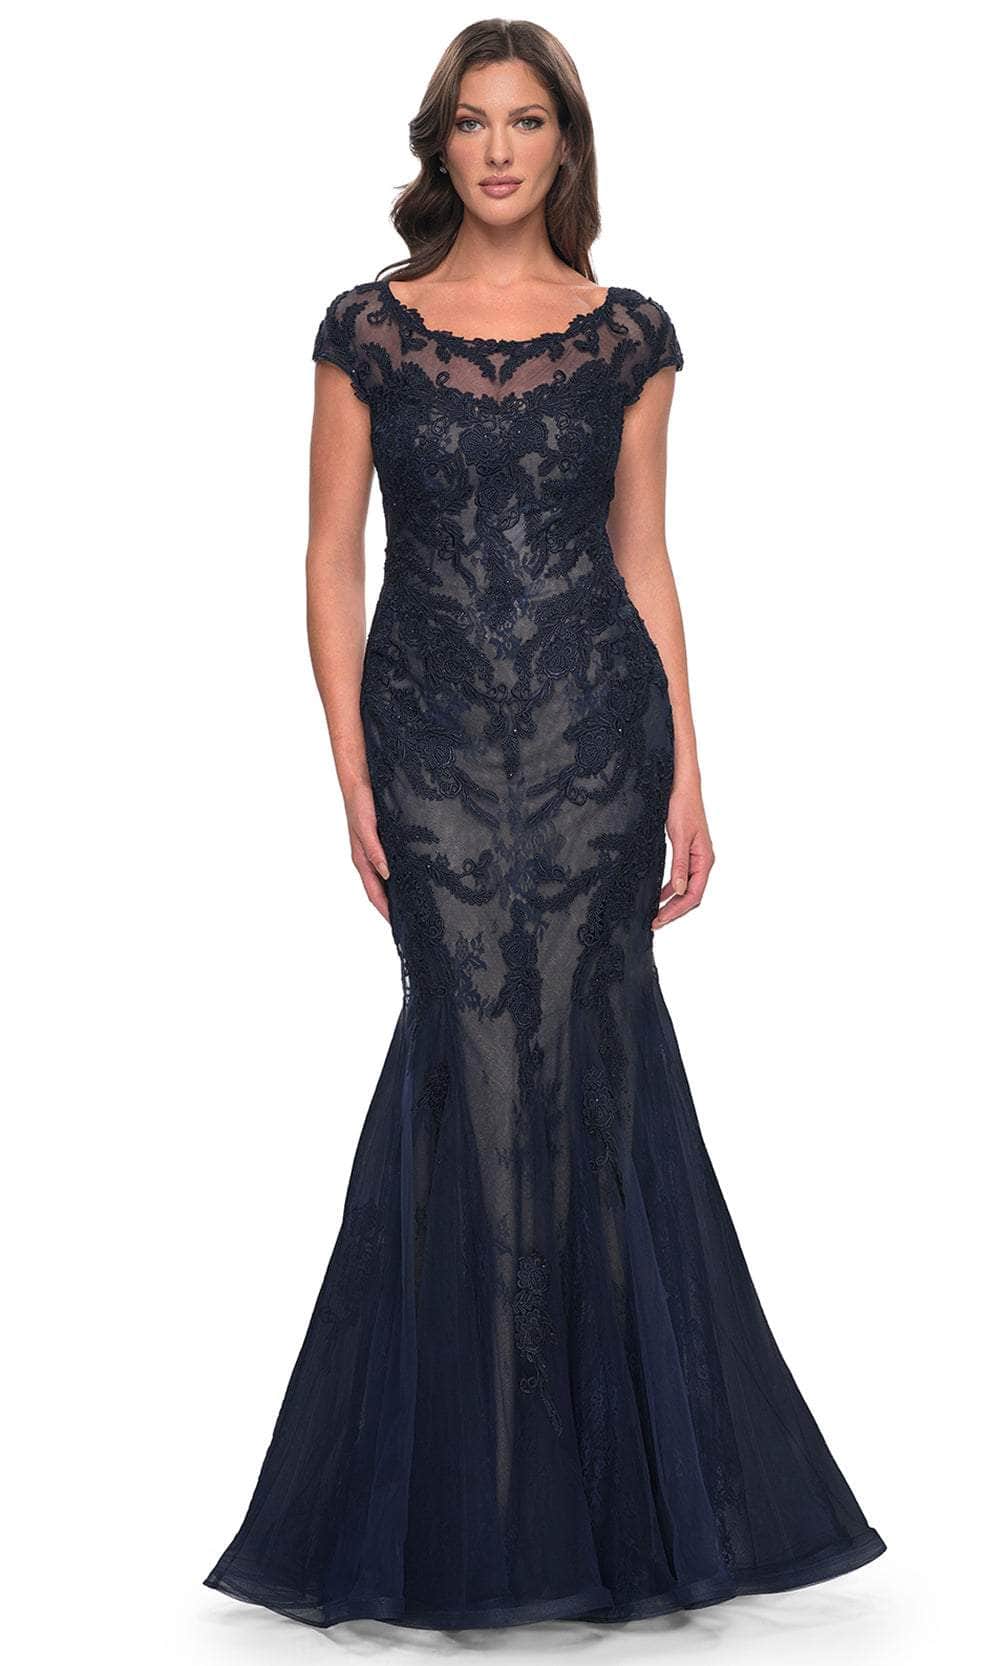 Image of La Femme 30876 - Cap Sleeve Embroidered Prom Gown